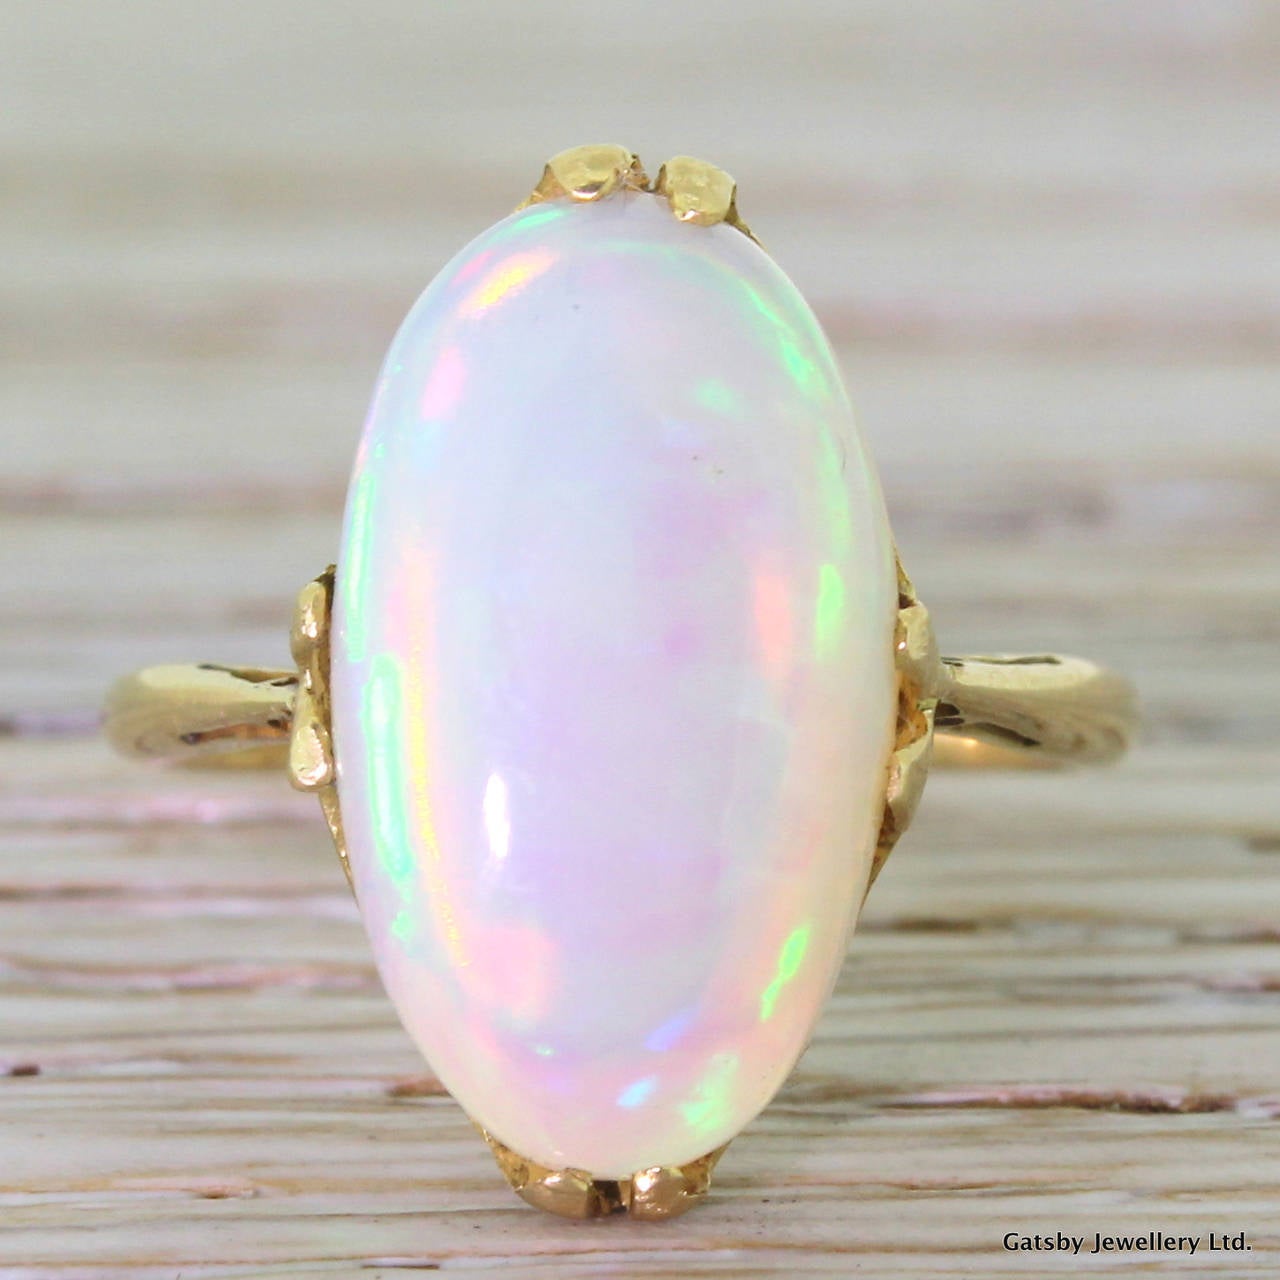 An electric opal mounted in a fine and delicate setting. The opal displays a very impressive play of colour, with bright flashes of neon green and orangey red. Secured by four double claws leading to a graceful open gallery.